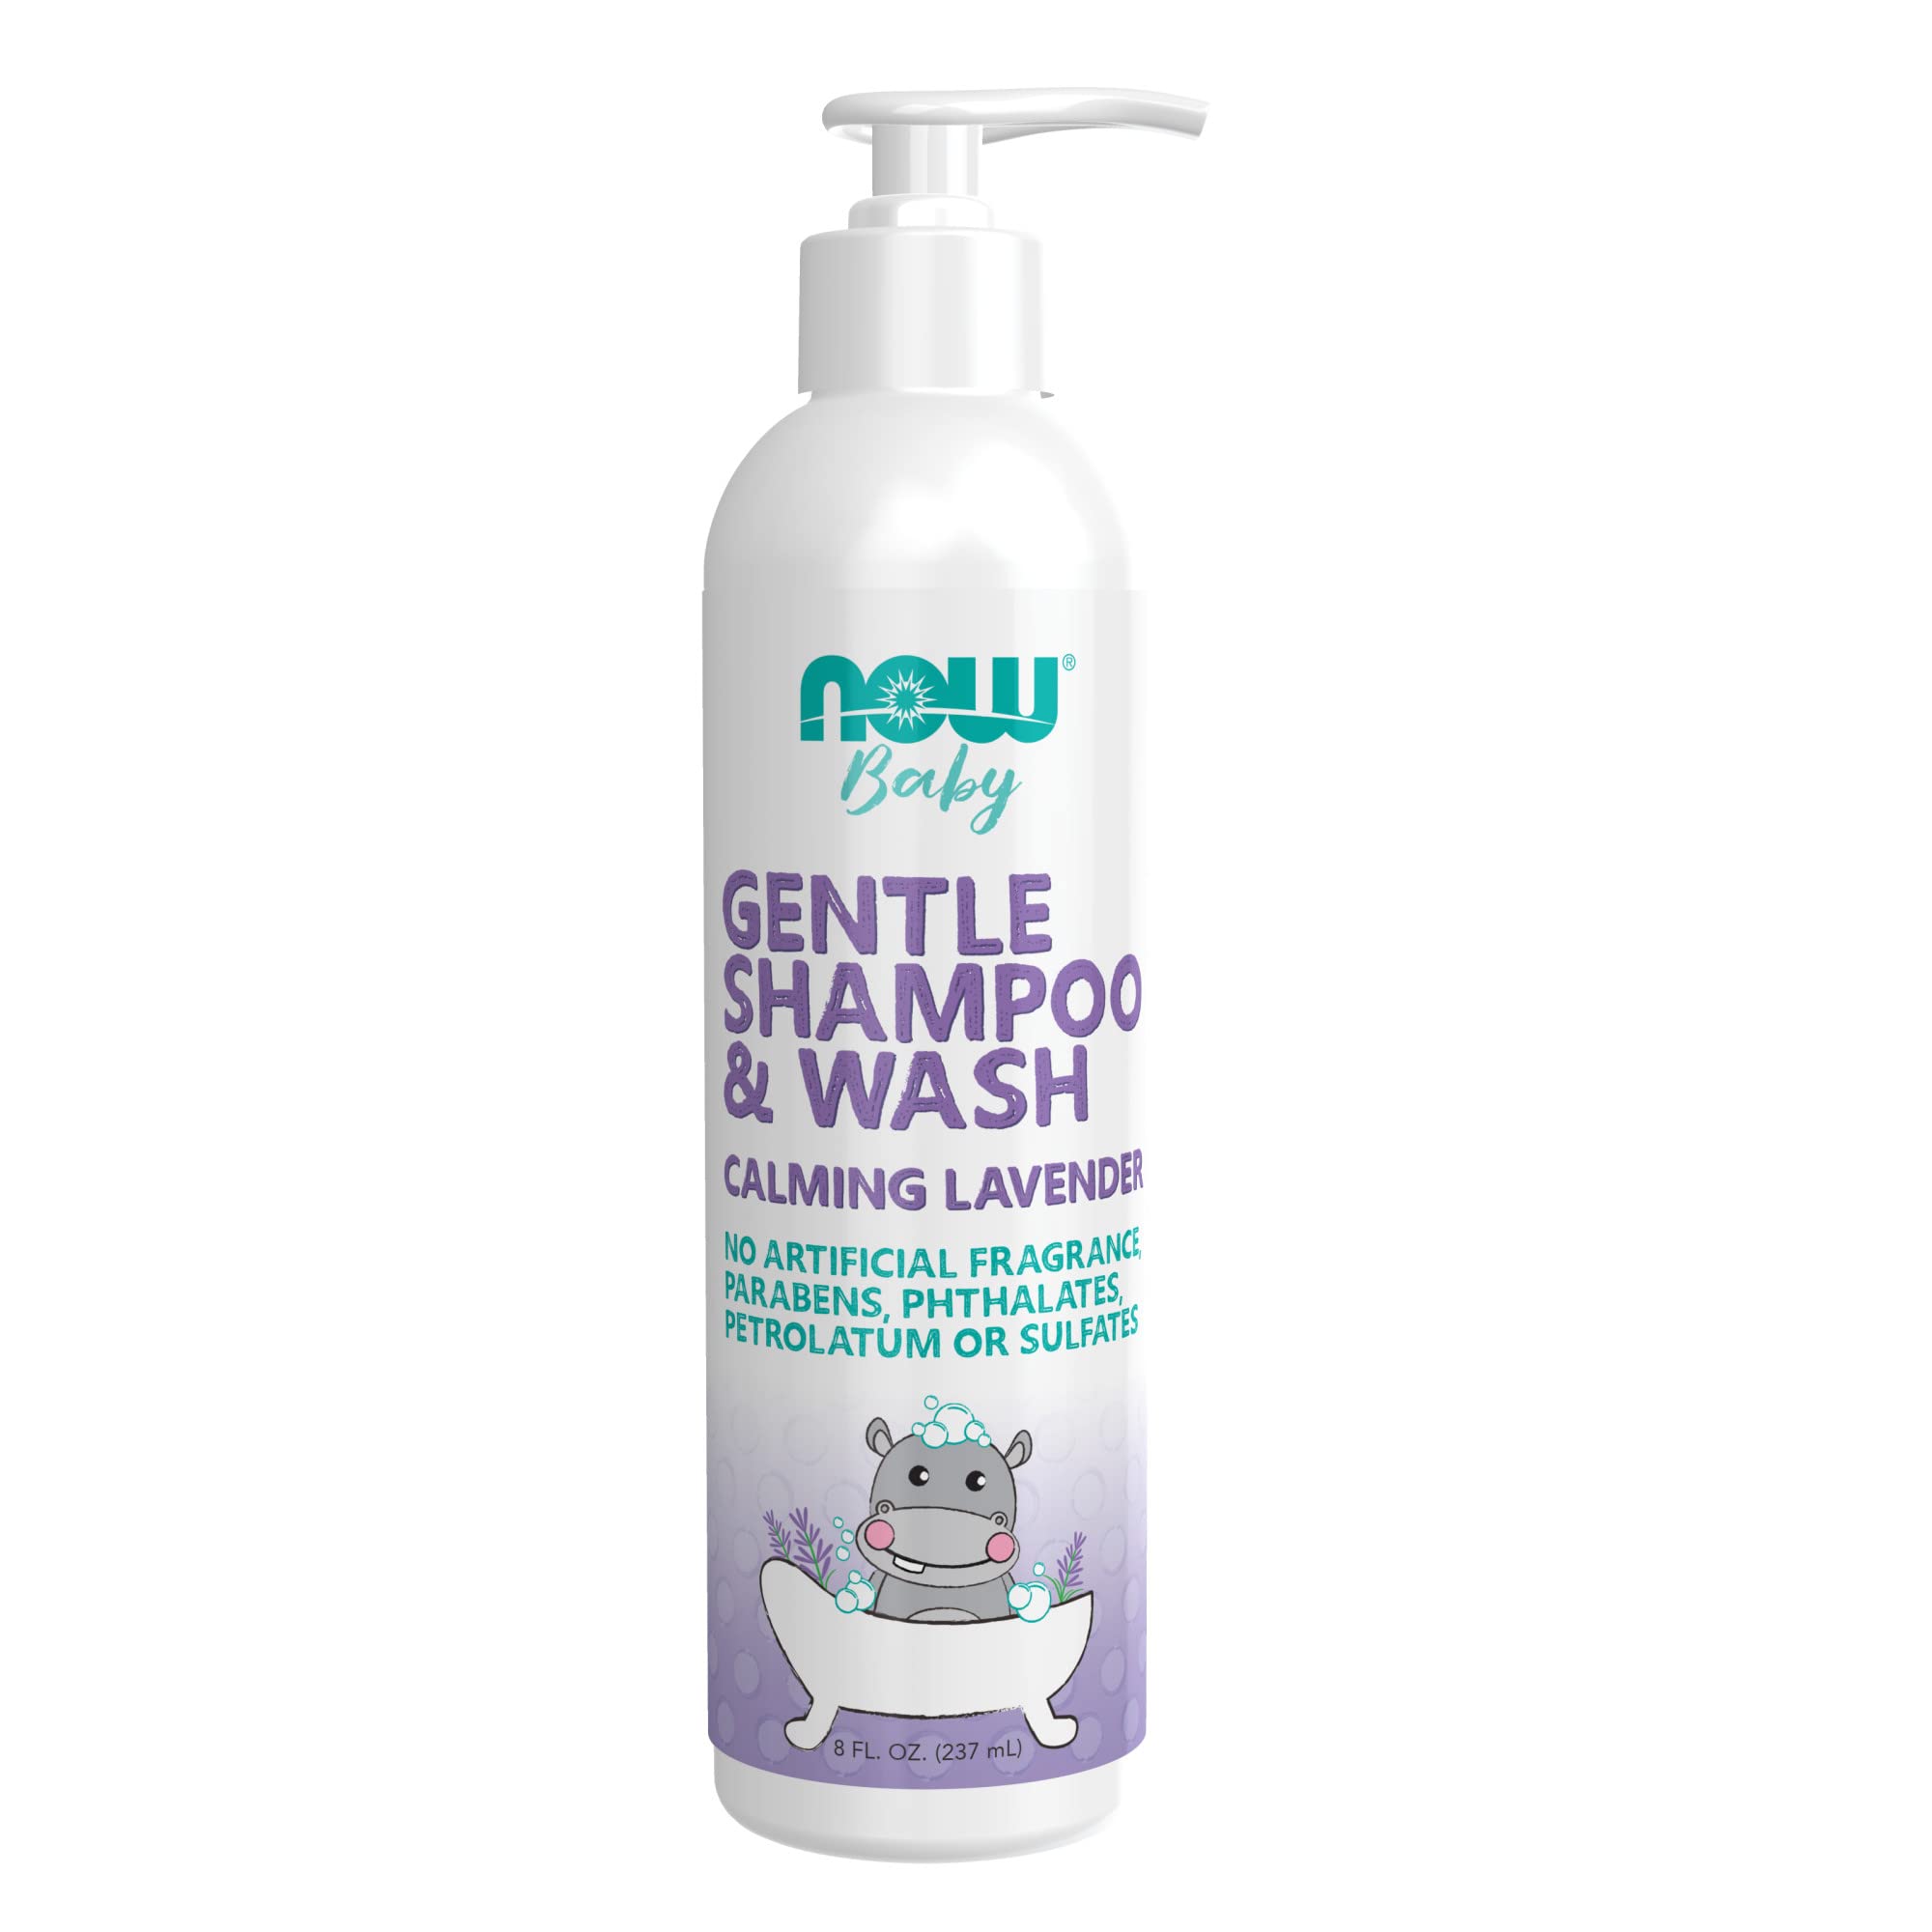 NOW Baby, Gentle Shampoo and Wash, Calming Lavender, Paraben Free, 8 Fluid Ounces